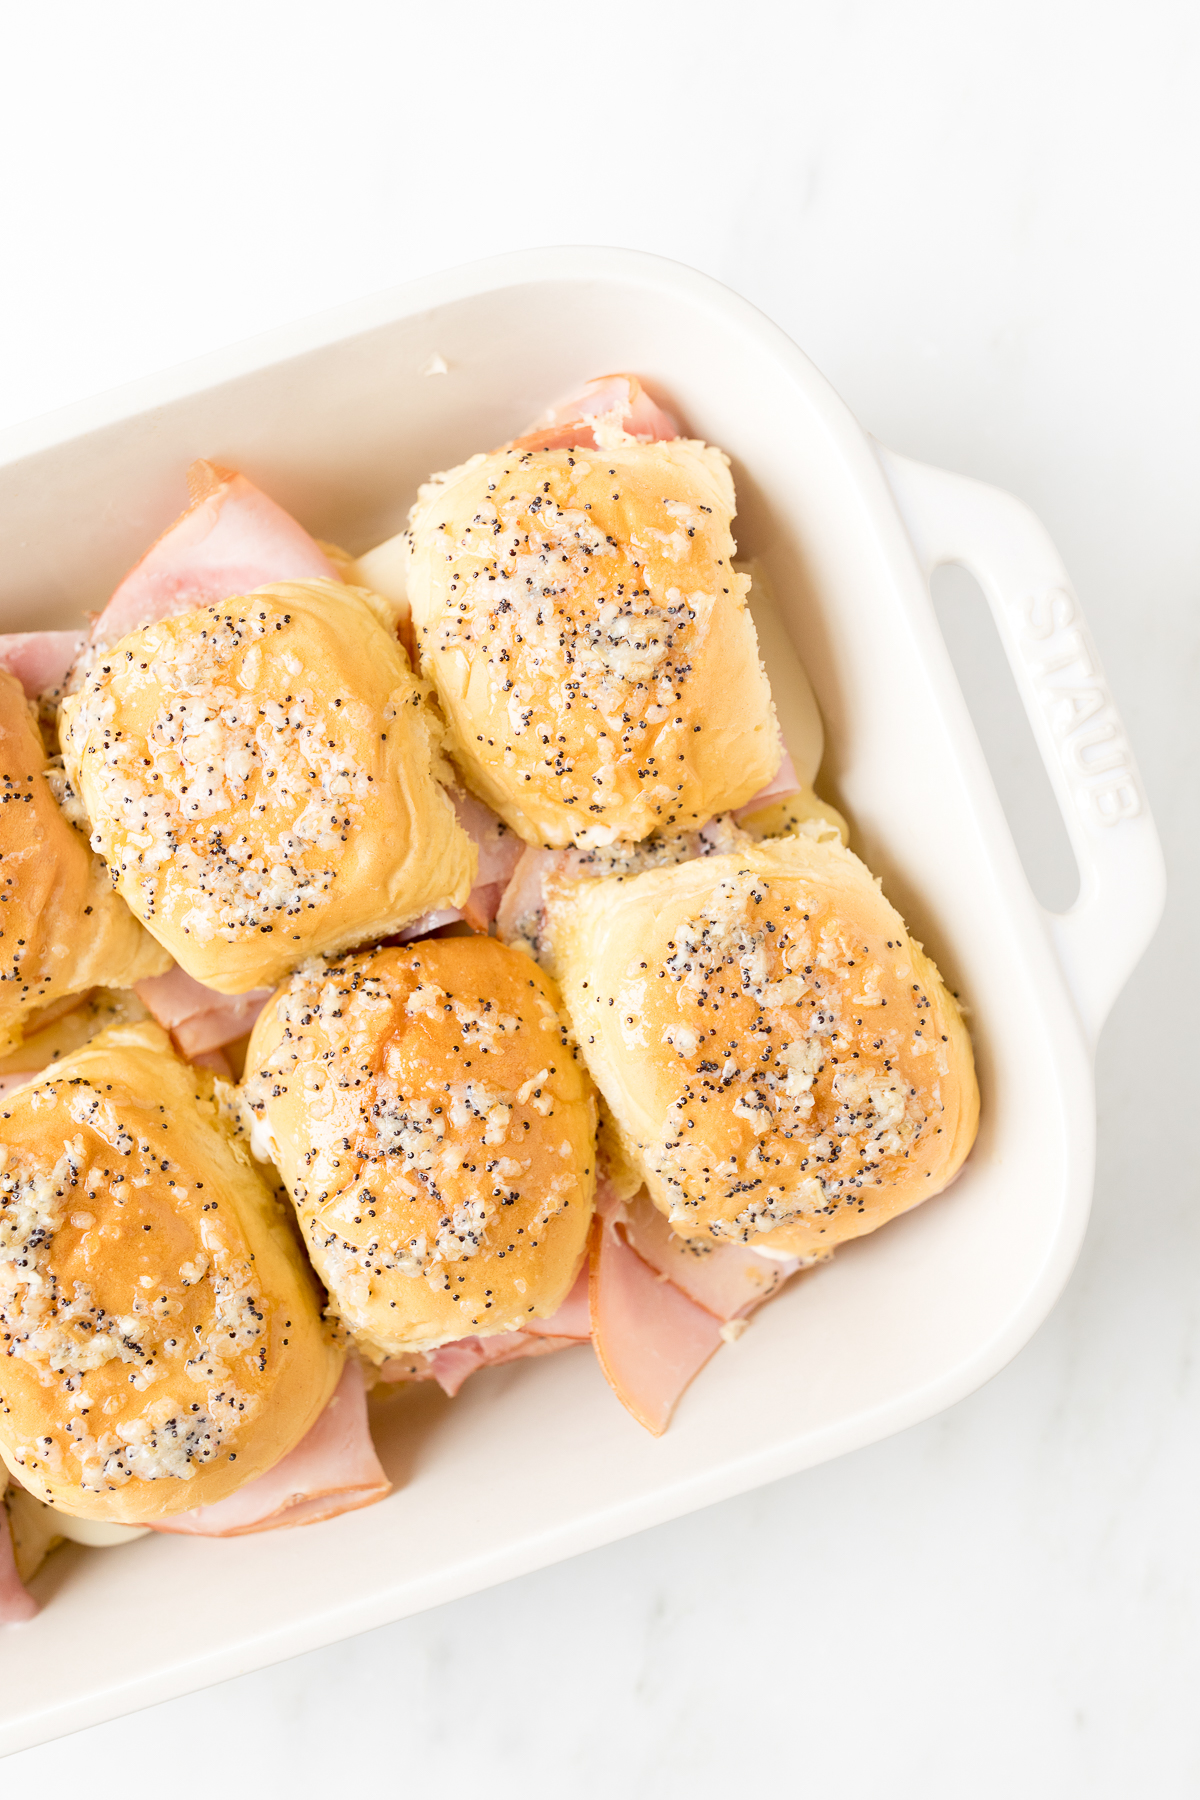 Hot ham and cheese sliders in a white baking dish.